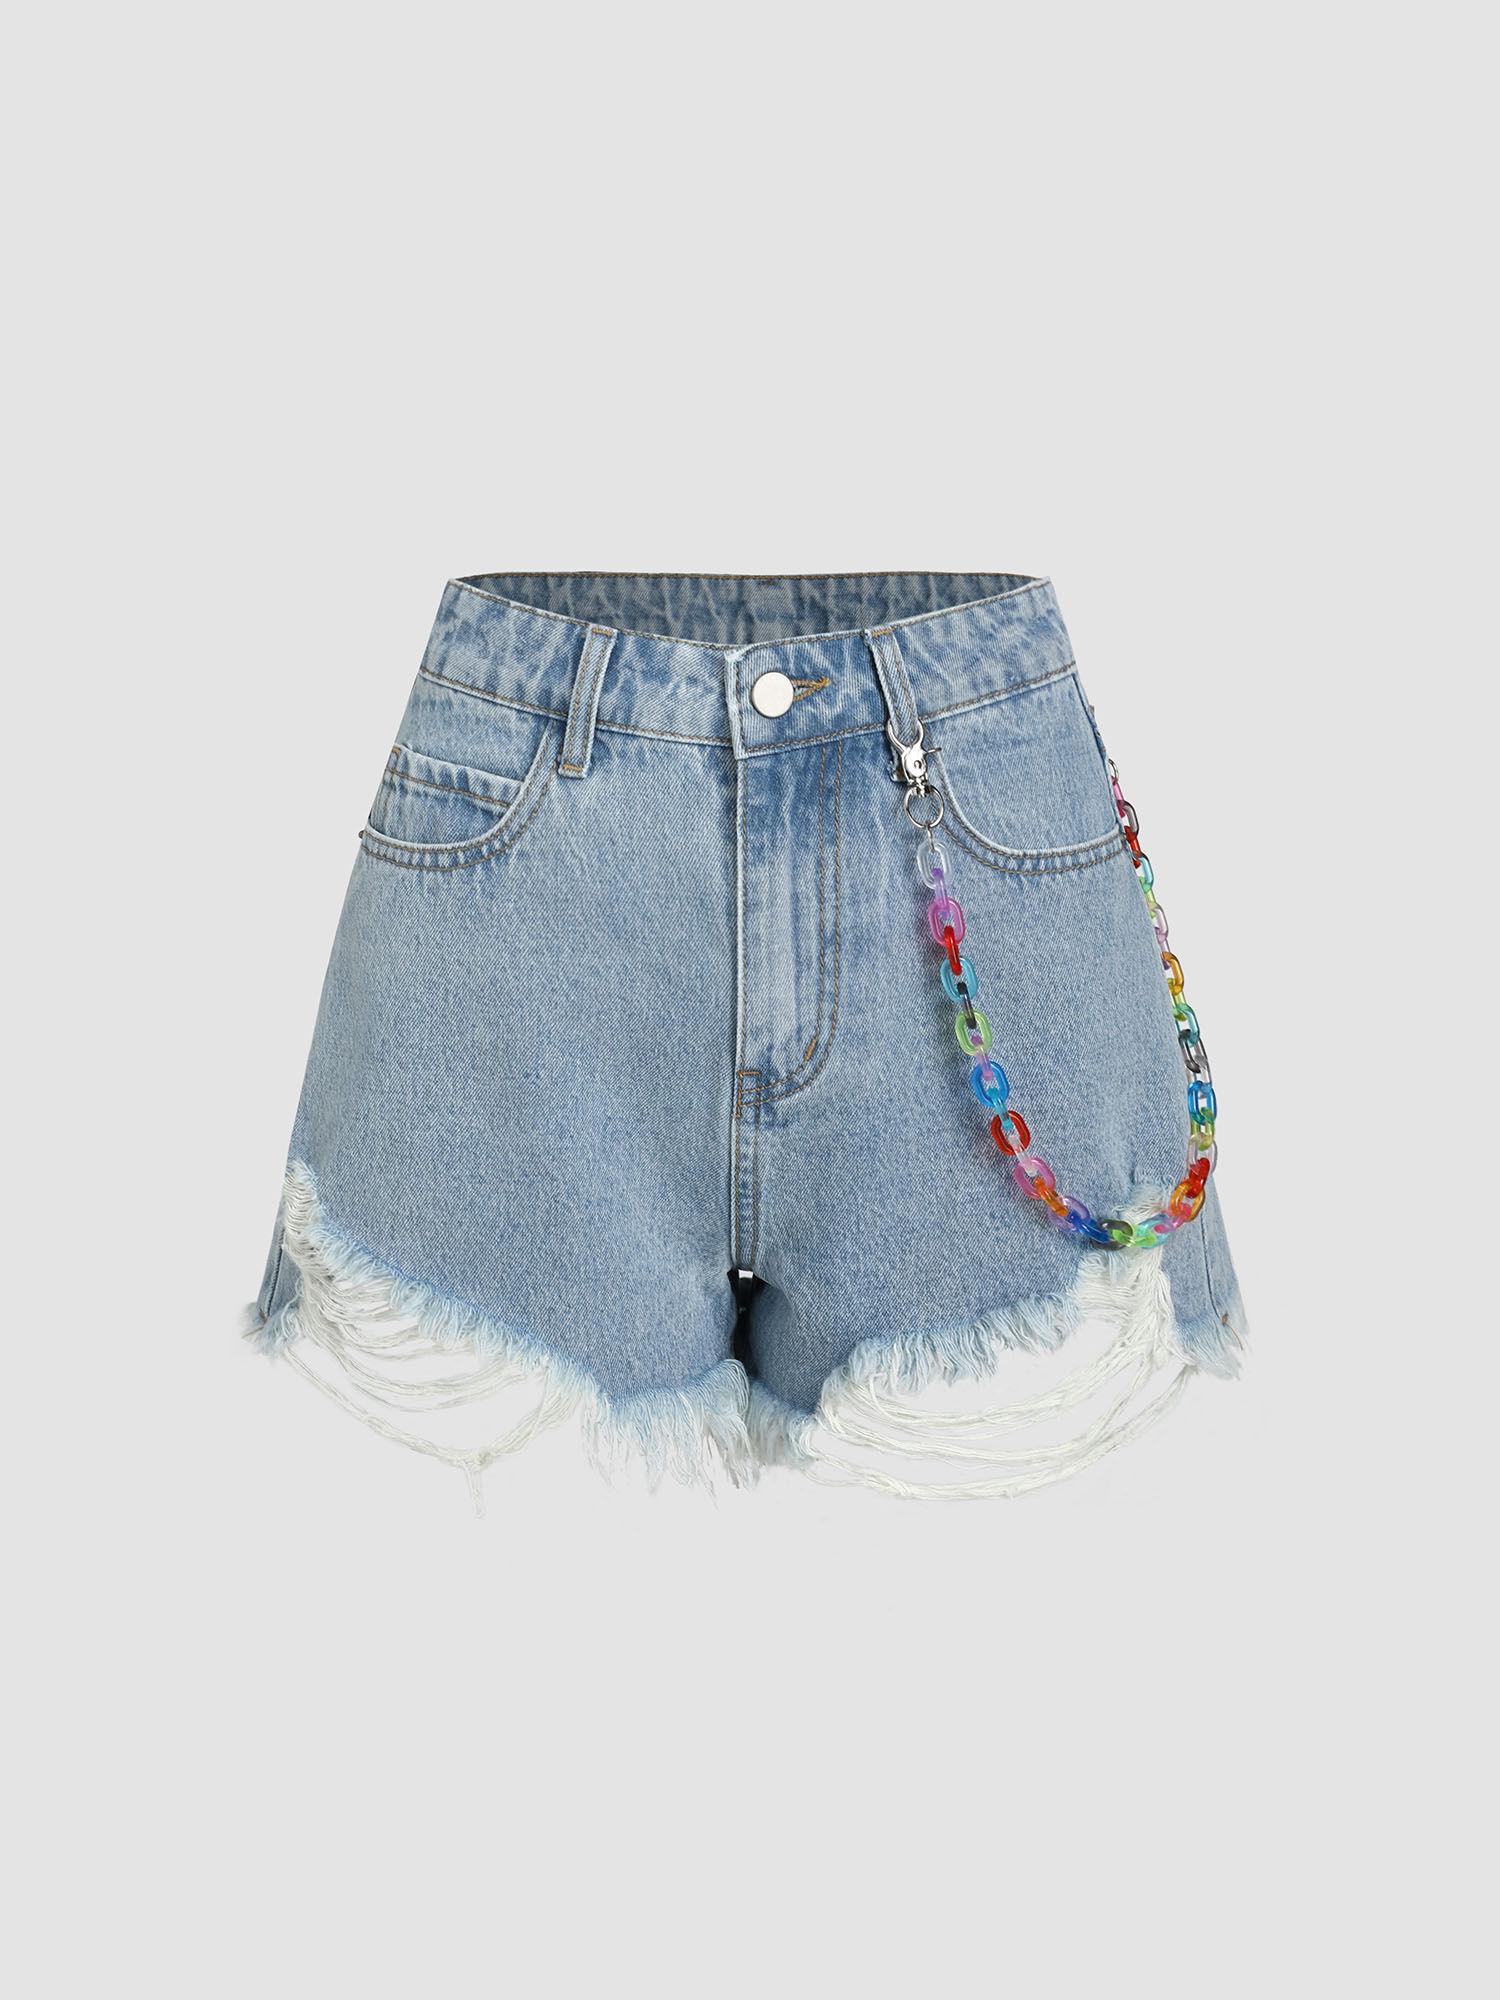 denim ripped tassel shorts with colorful chain (set of 2)